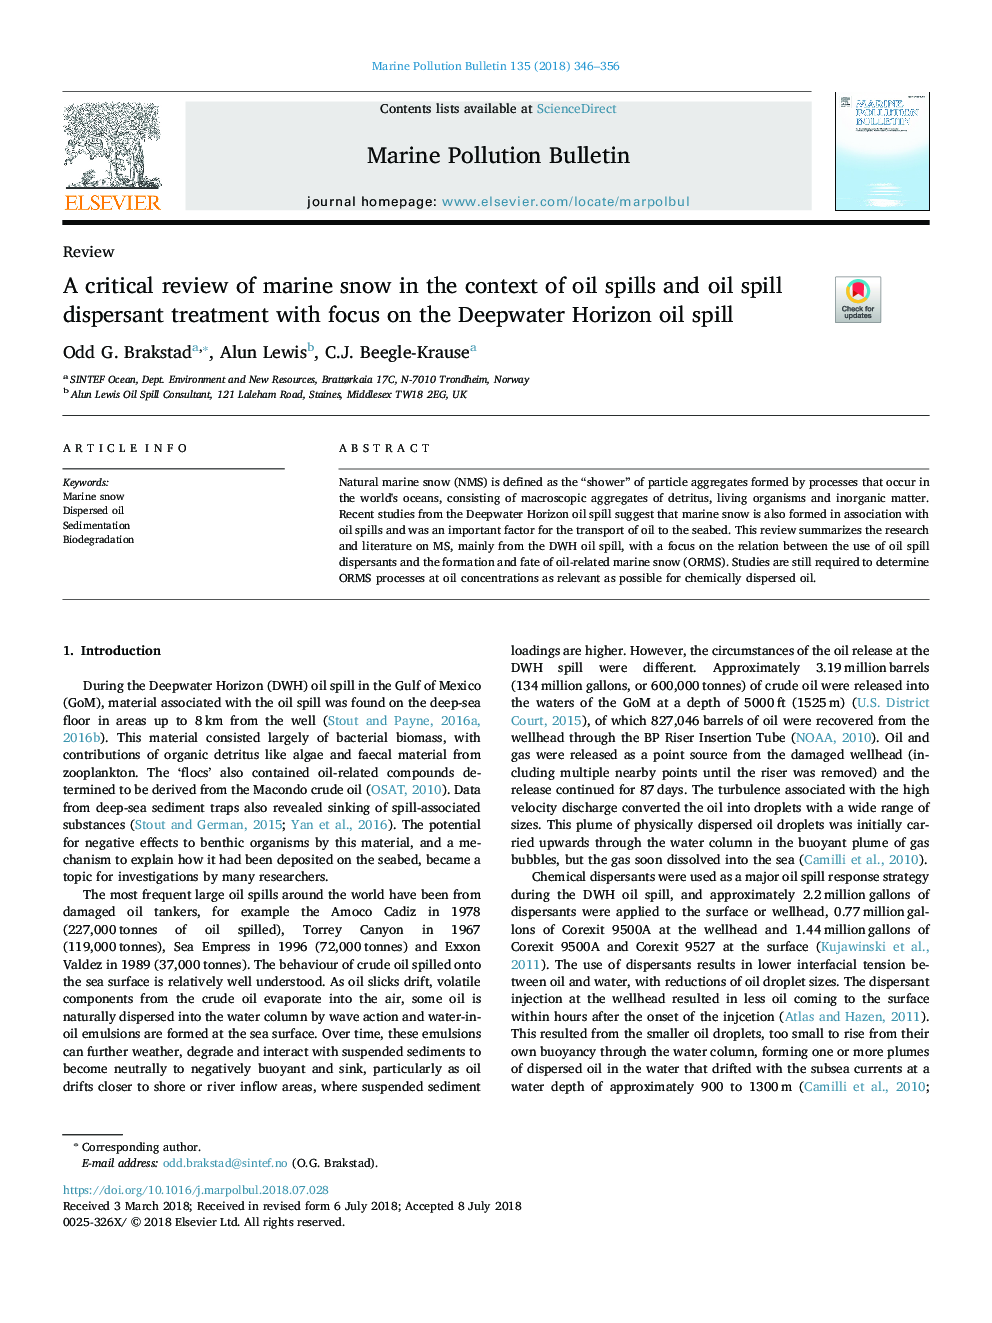 A critical review of marine snow in the context of oil spills and oil spill dispersant treatment with focus on the Deepwater Horizon oil spill